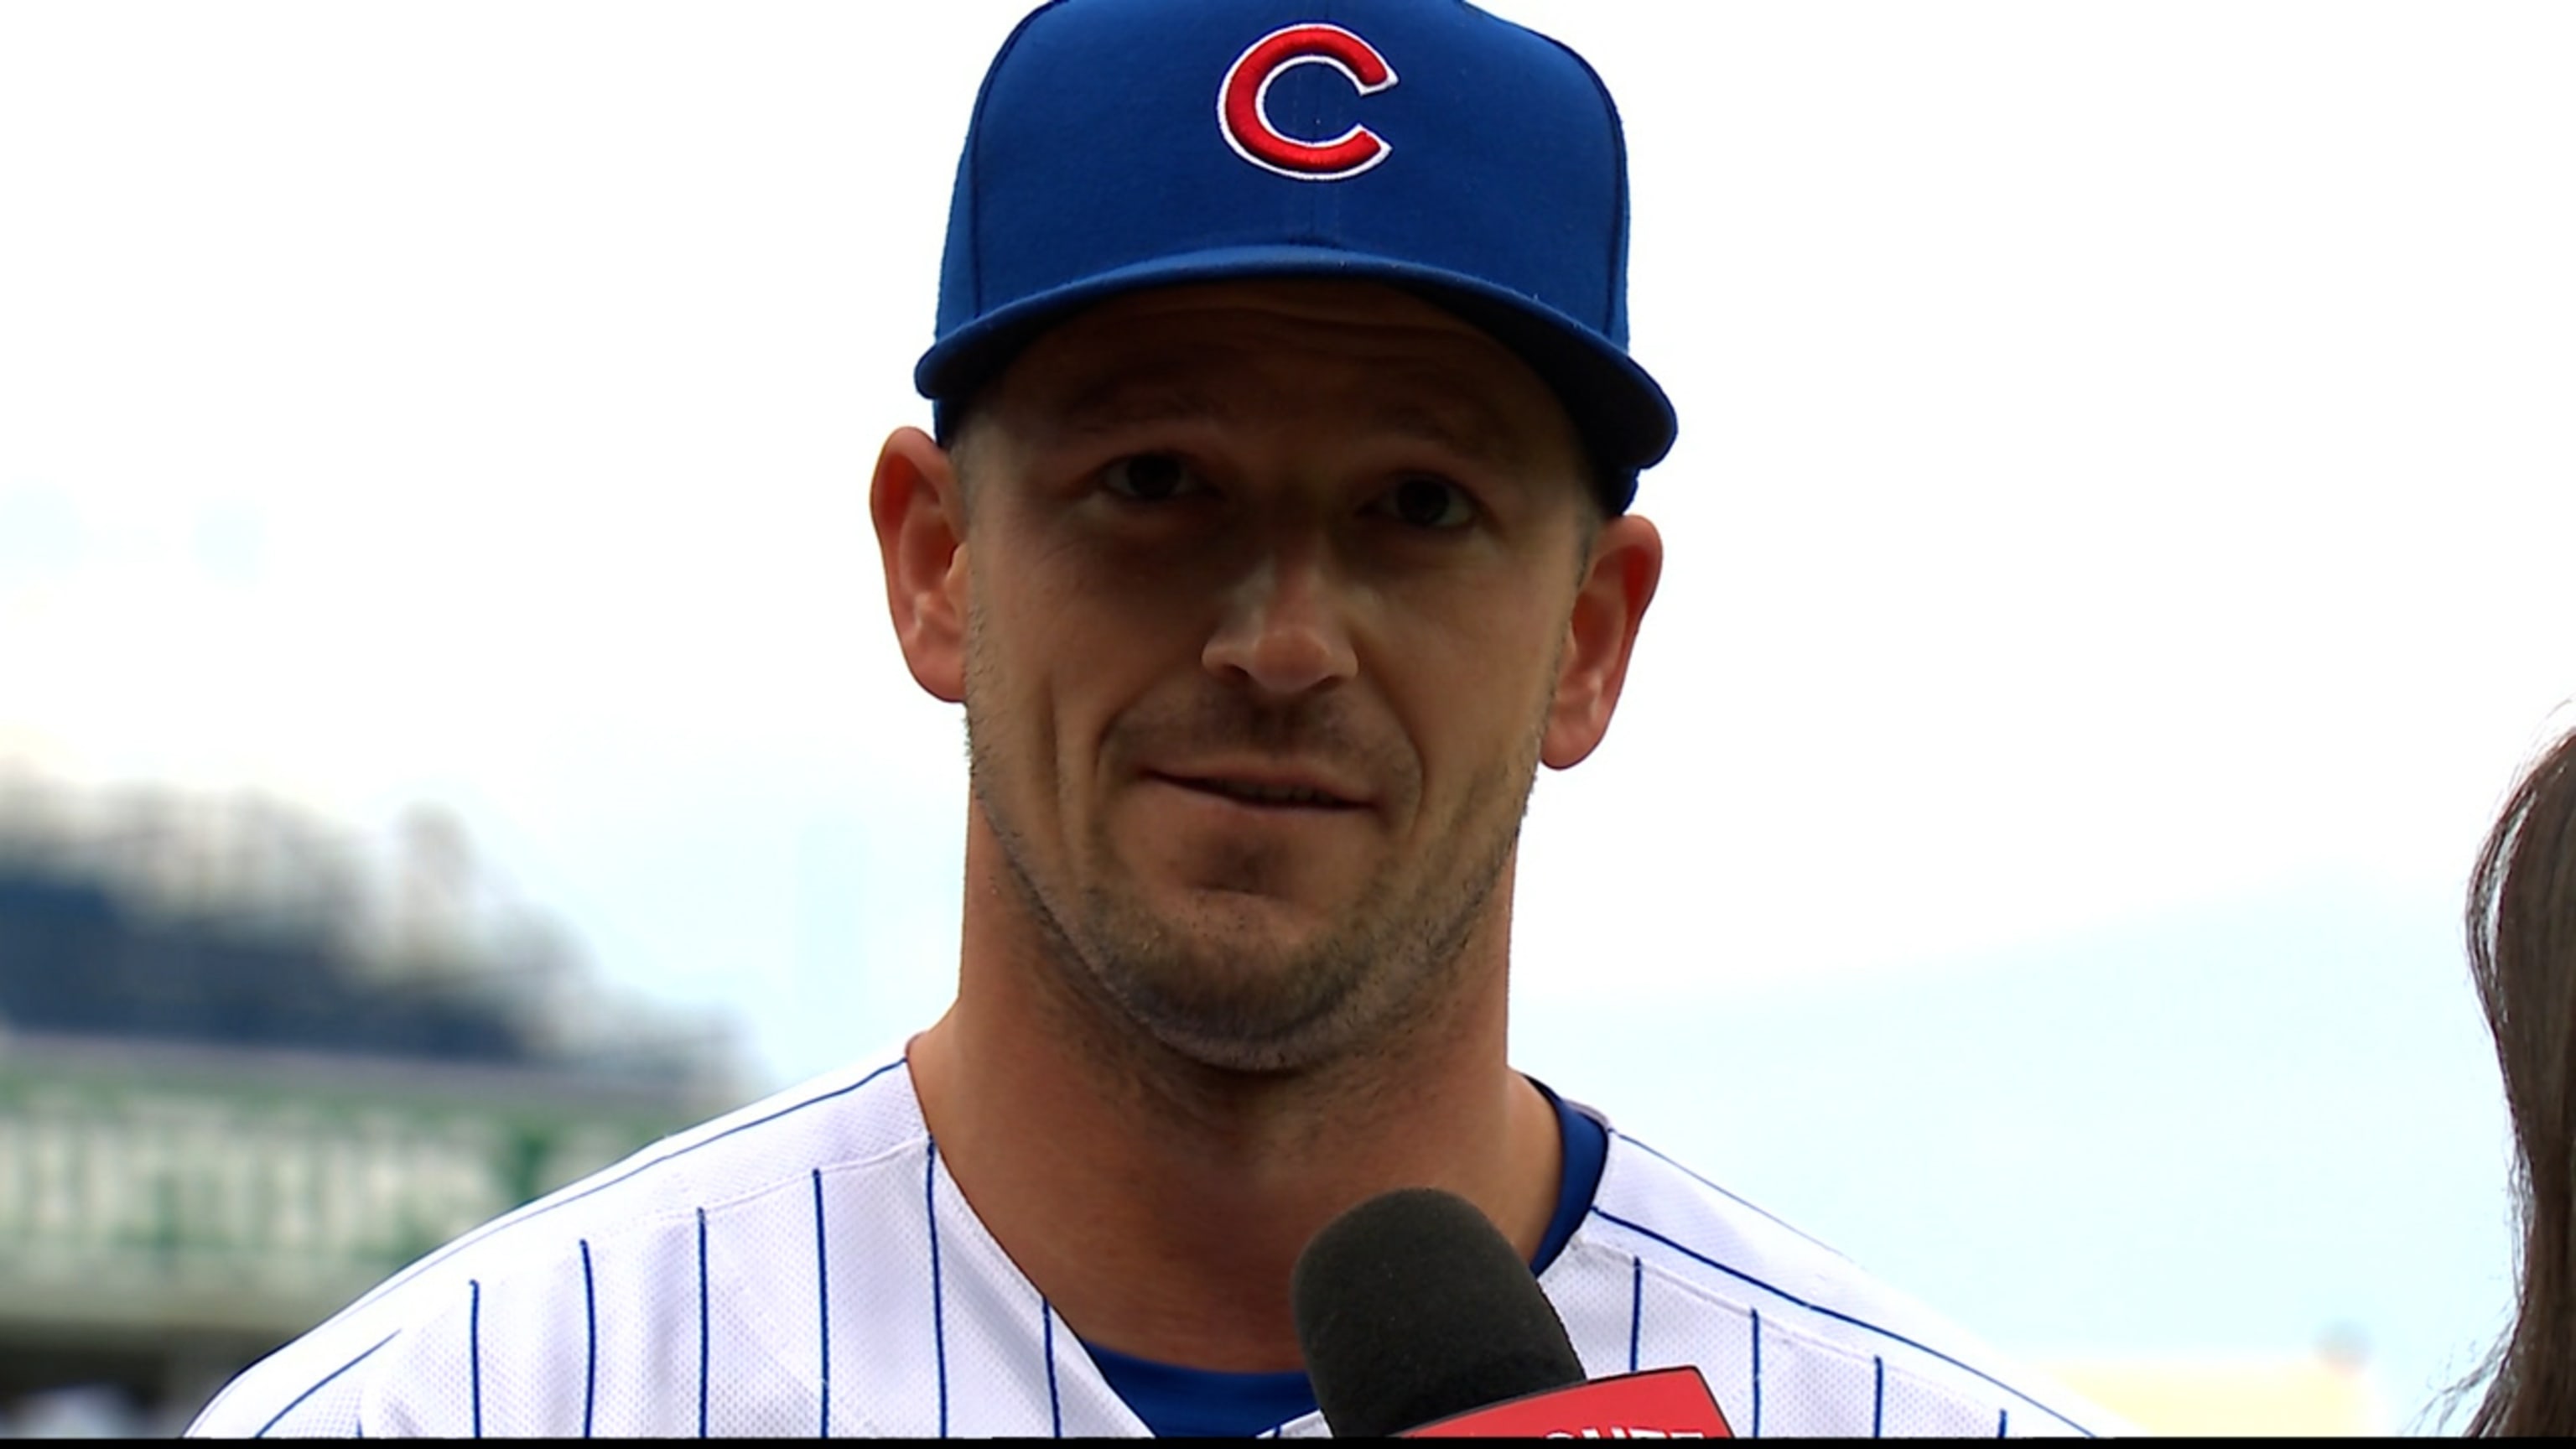 Cubs' Yan Gomes wears football helmet in postgame after tackling Drew Smyly  – NBC Sports Chicago